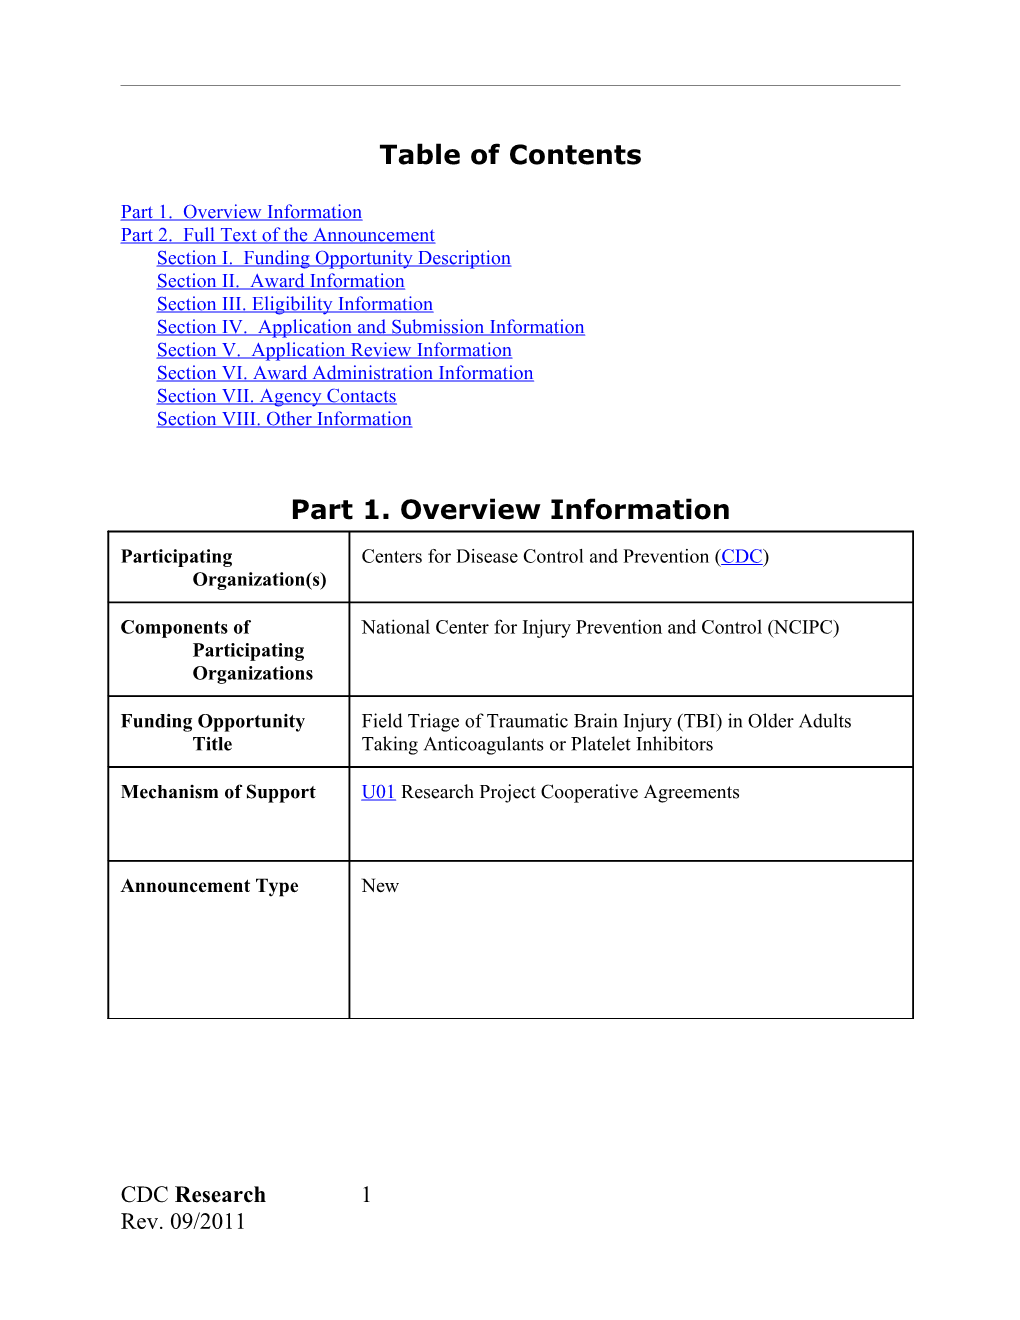 Table of Contents s265